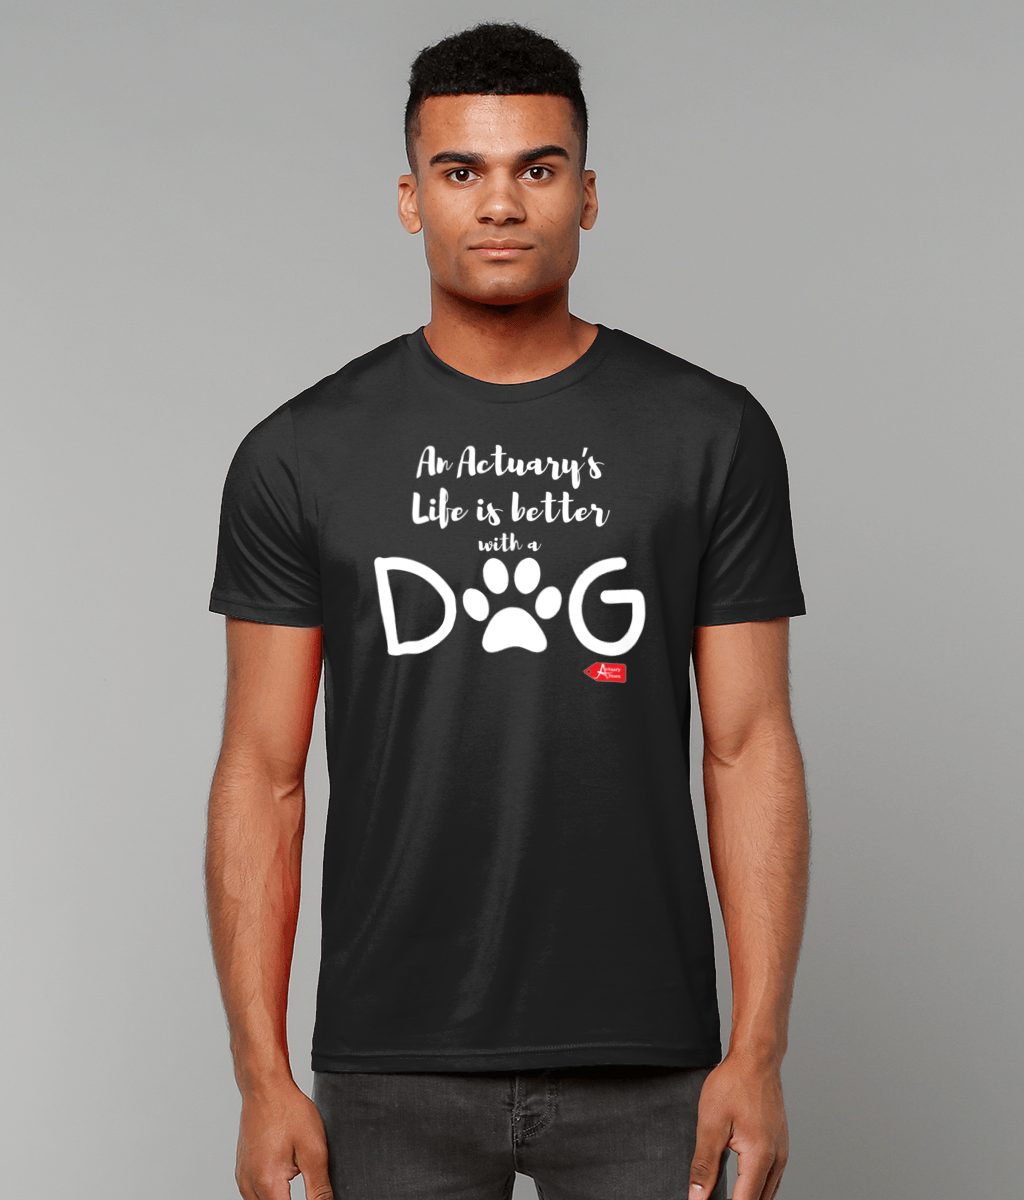 An Actuary's Life is better with a Dog T-Shirt